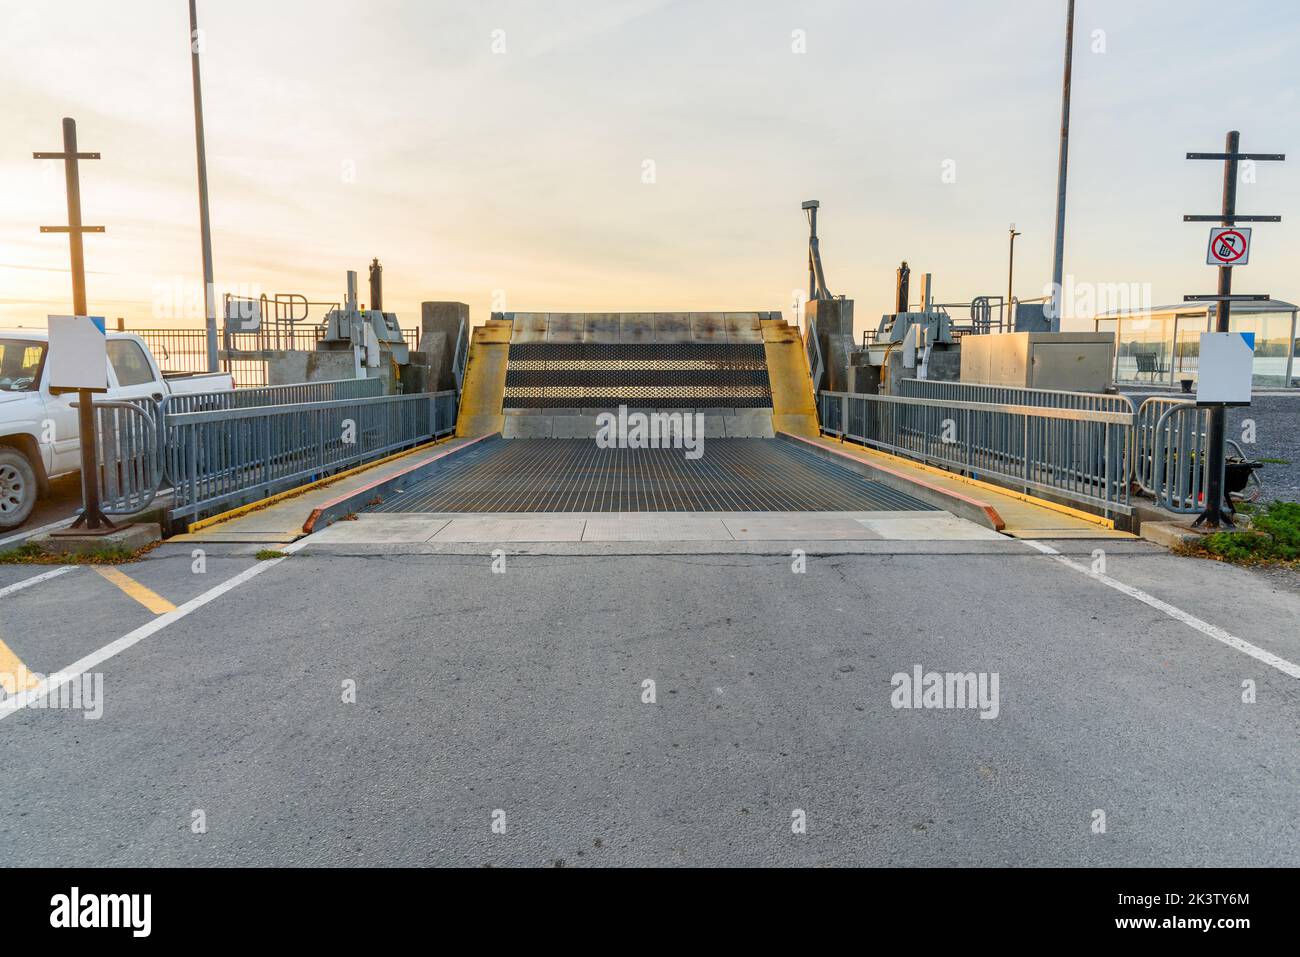 Loading ramp in a deserted ferry terminal at sunset Stock Photo